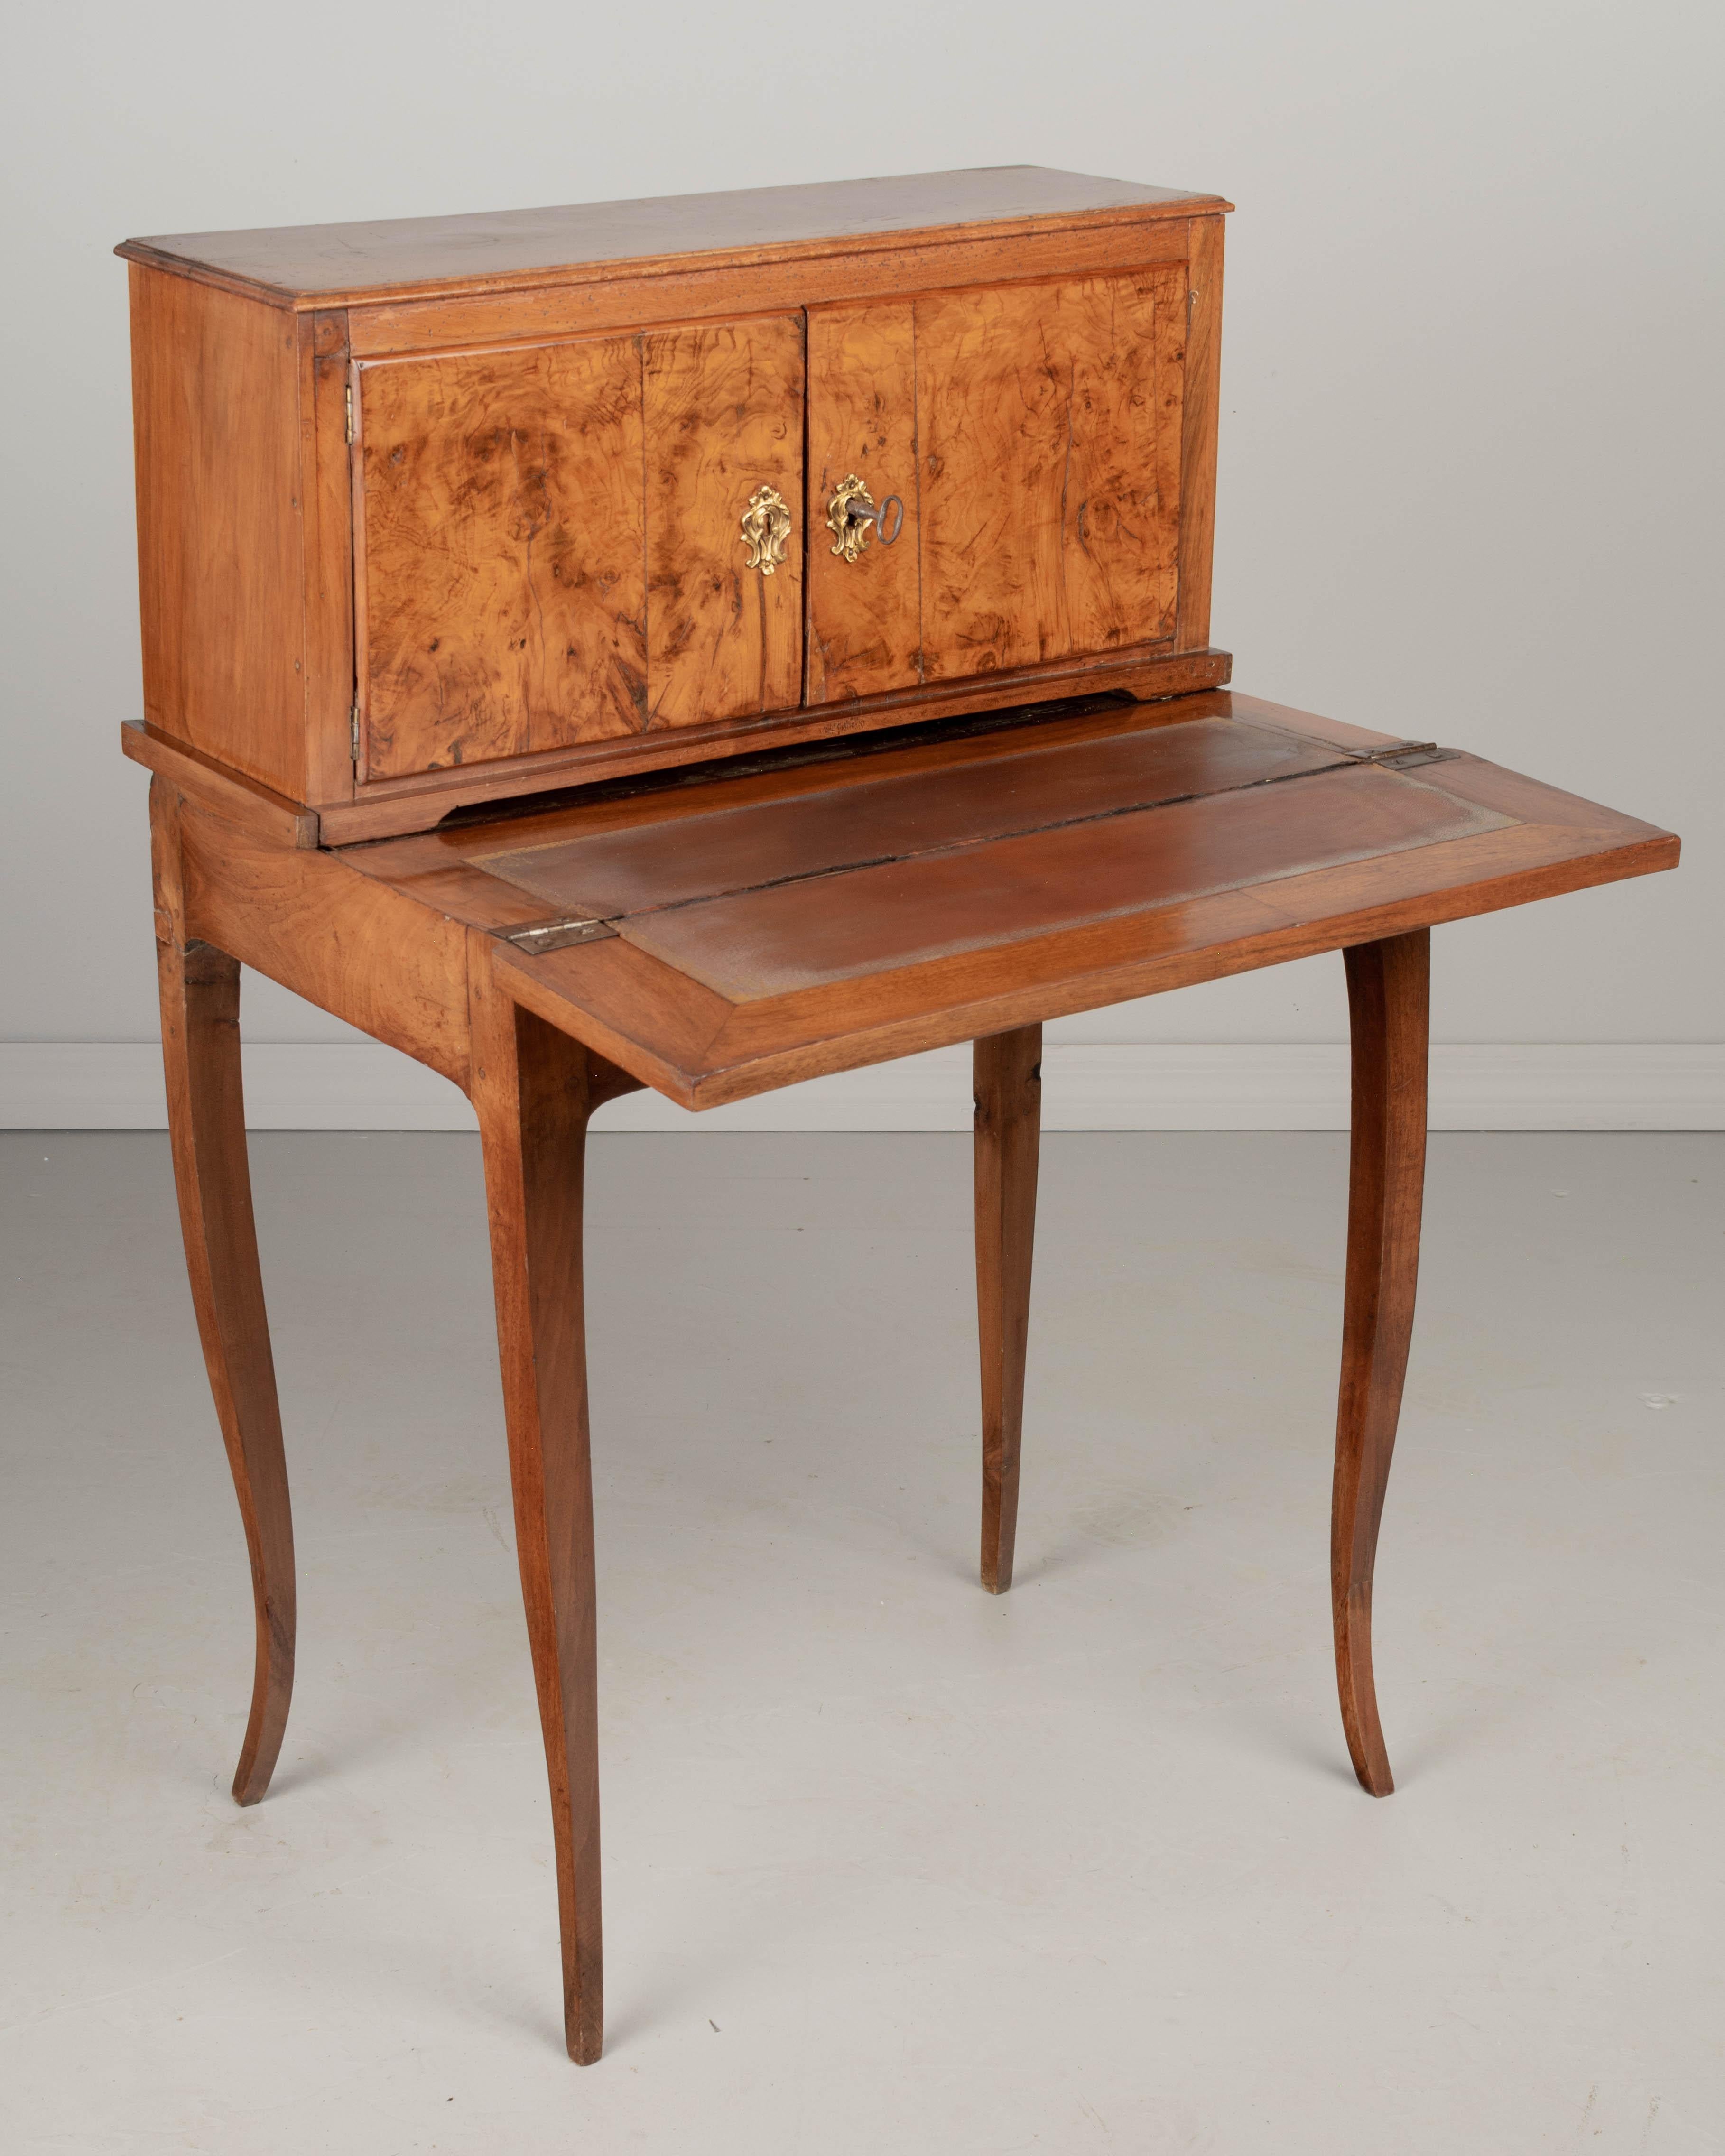 18th Century French Louis XV Desk or Writing Table In Good Condition For Sale In Winter Park, FL